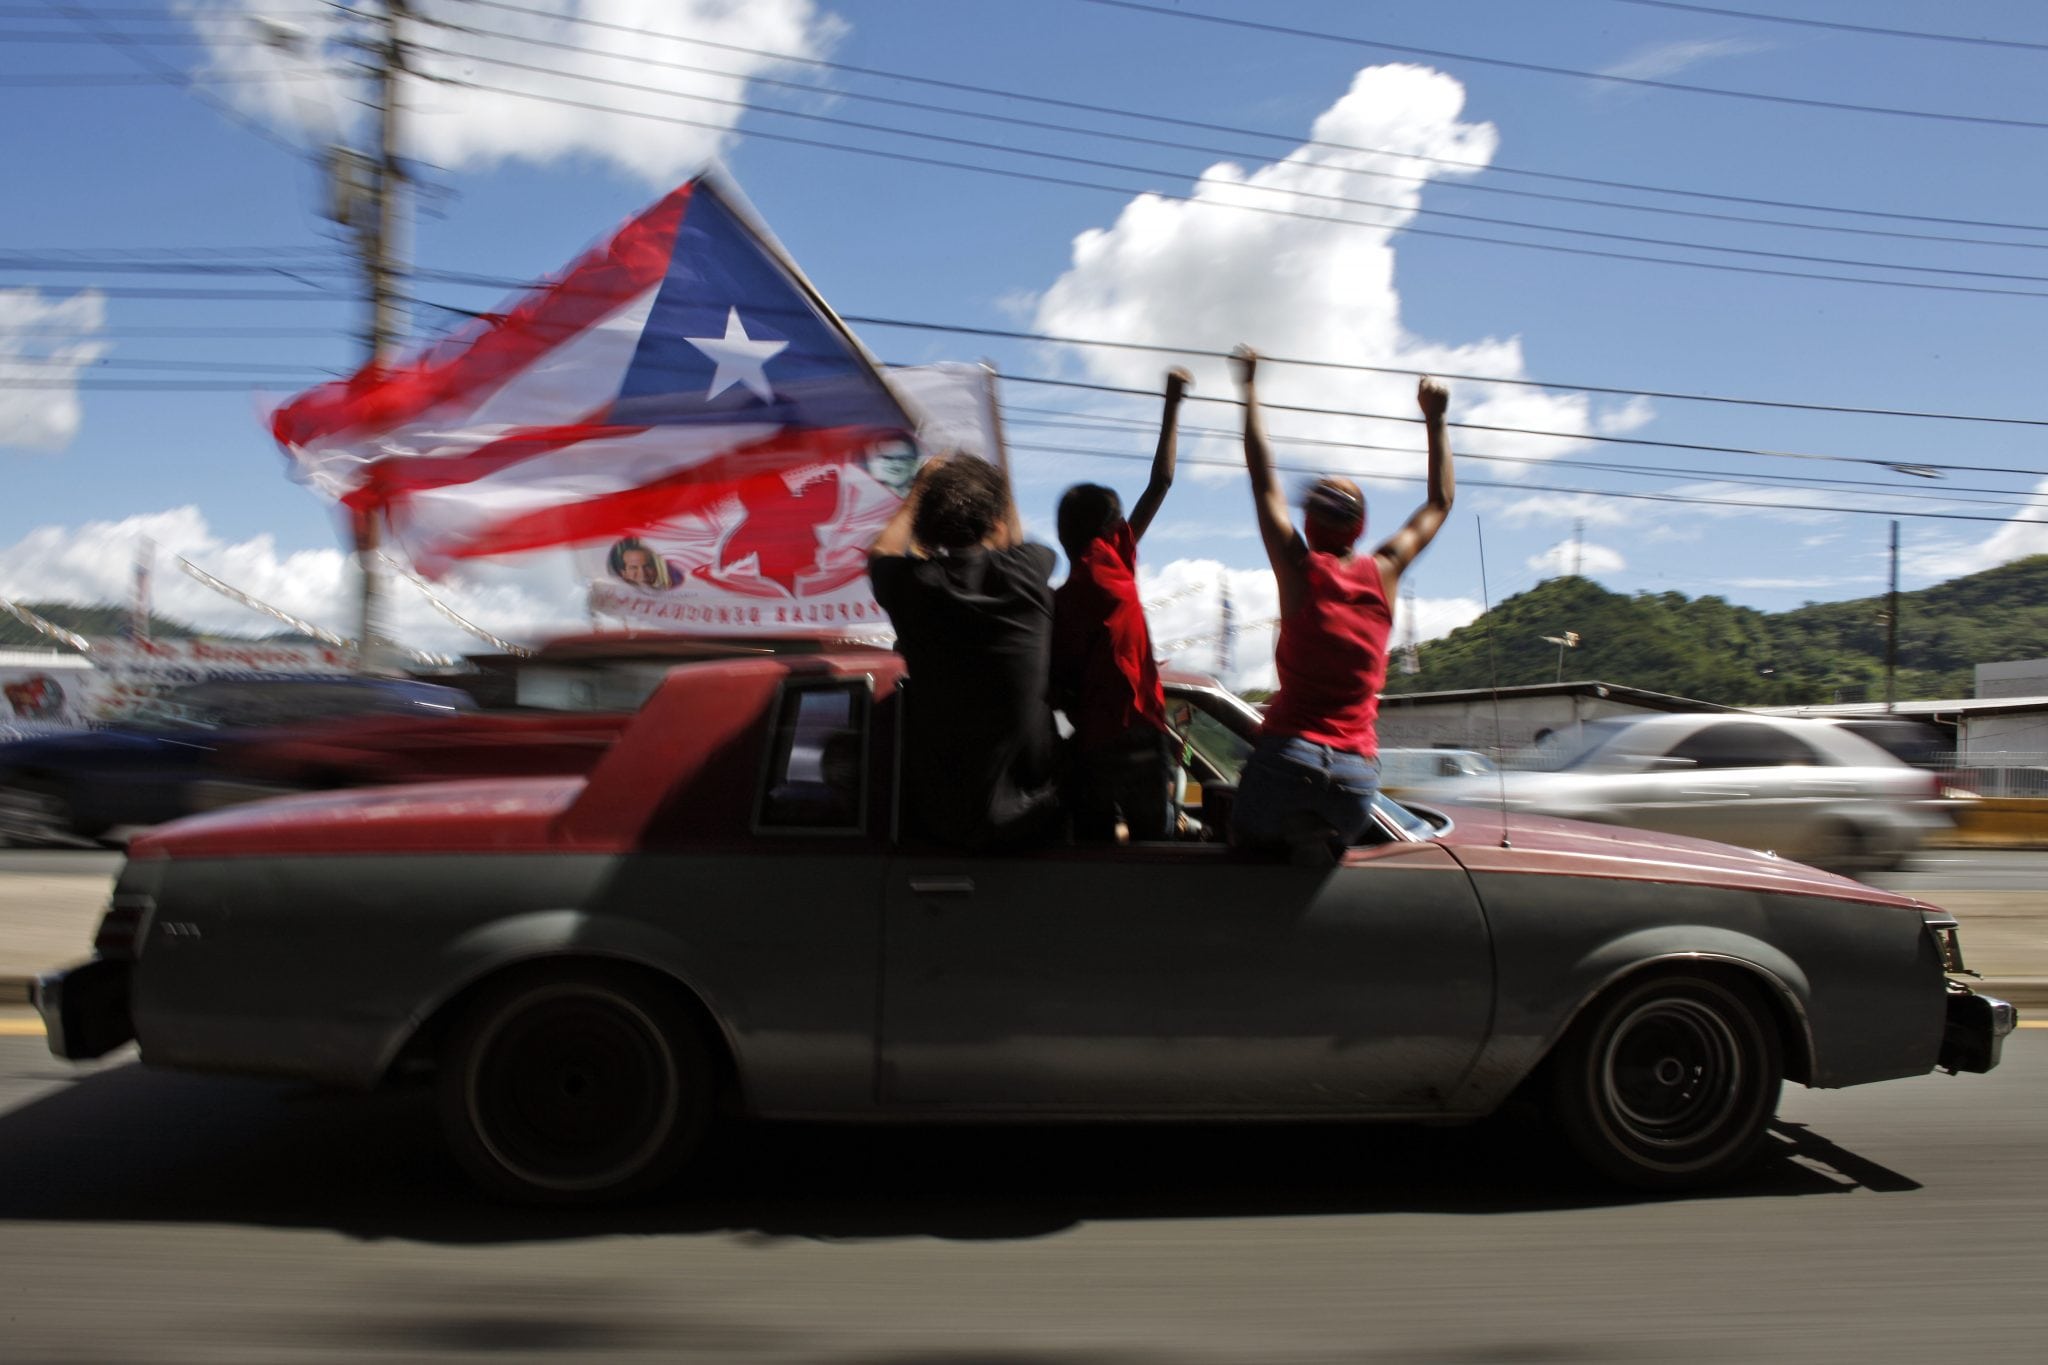 People ride atop a vehicle waving a Puerto Rican flag during elections in San Juan, Puerto Rico, Tuesday, Nov. 6, 2012. 